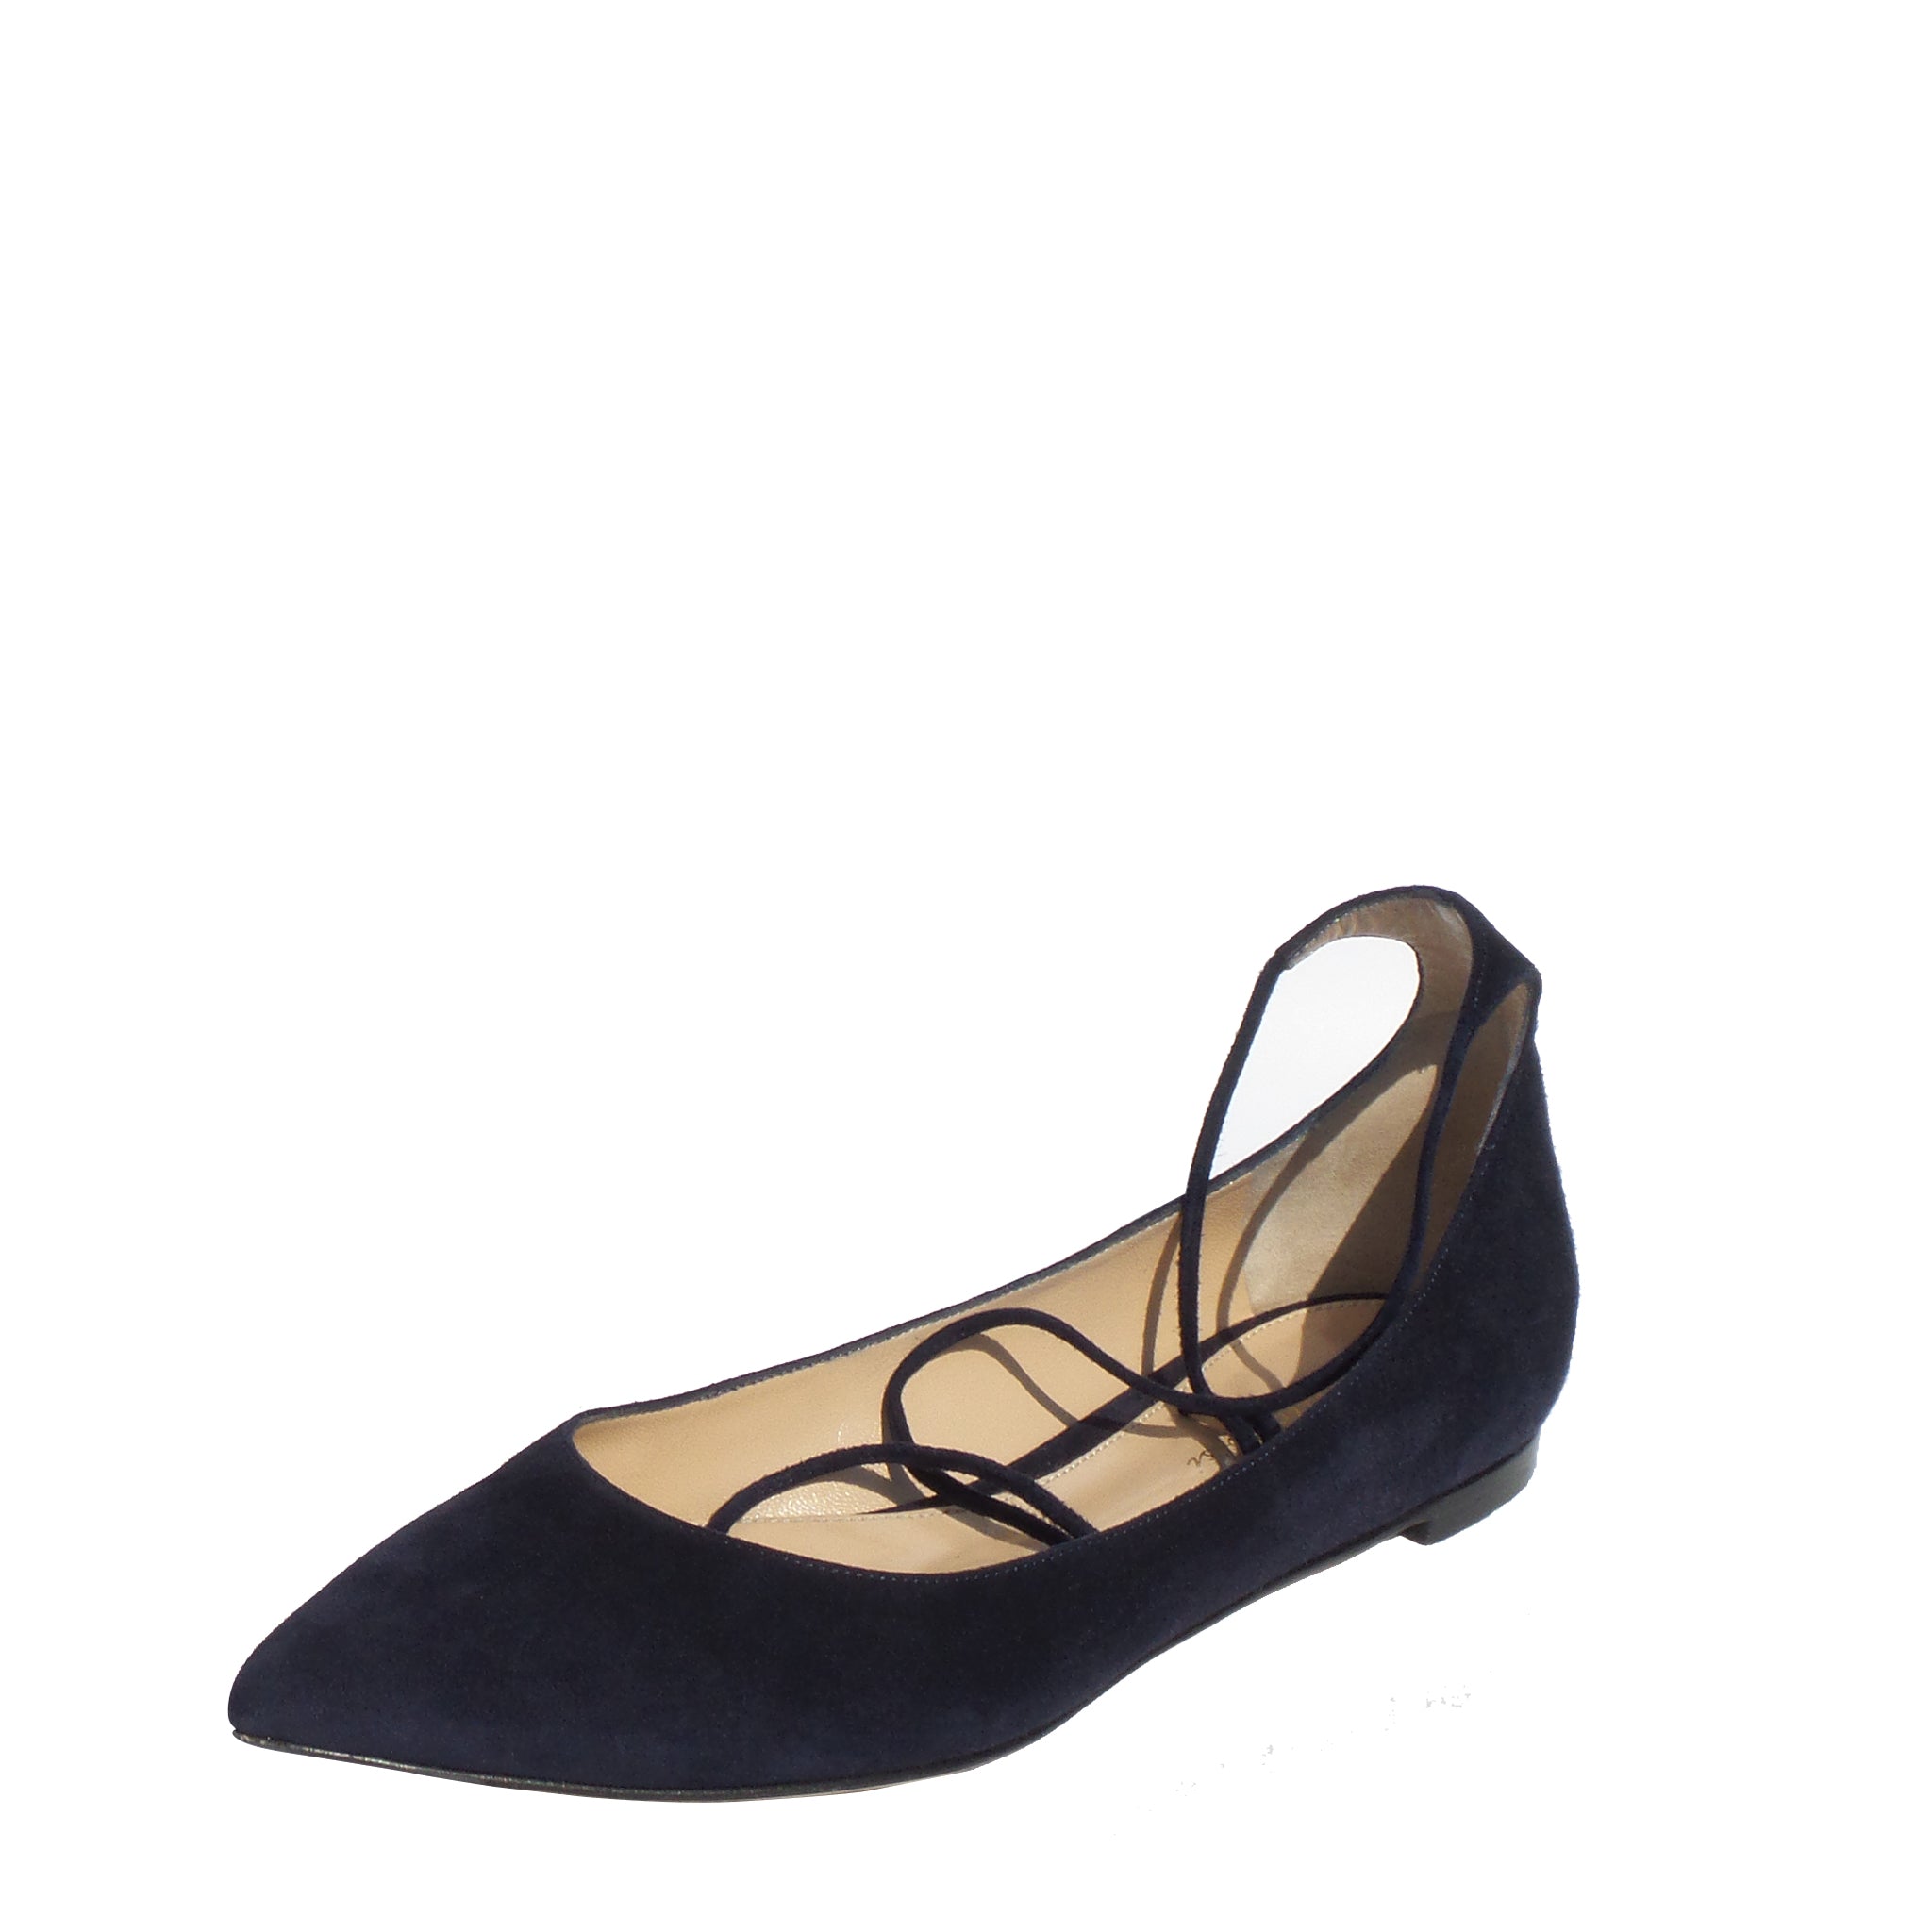 GIANVITO ROSSI Navy Blue Suede Pointed 